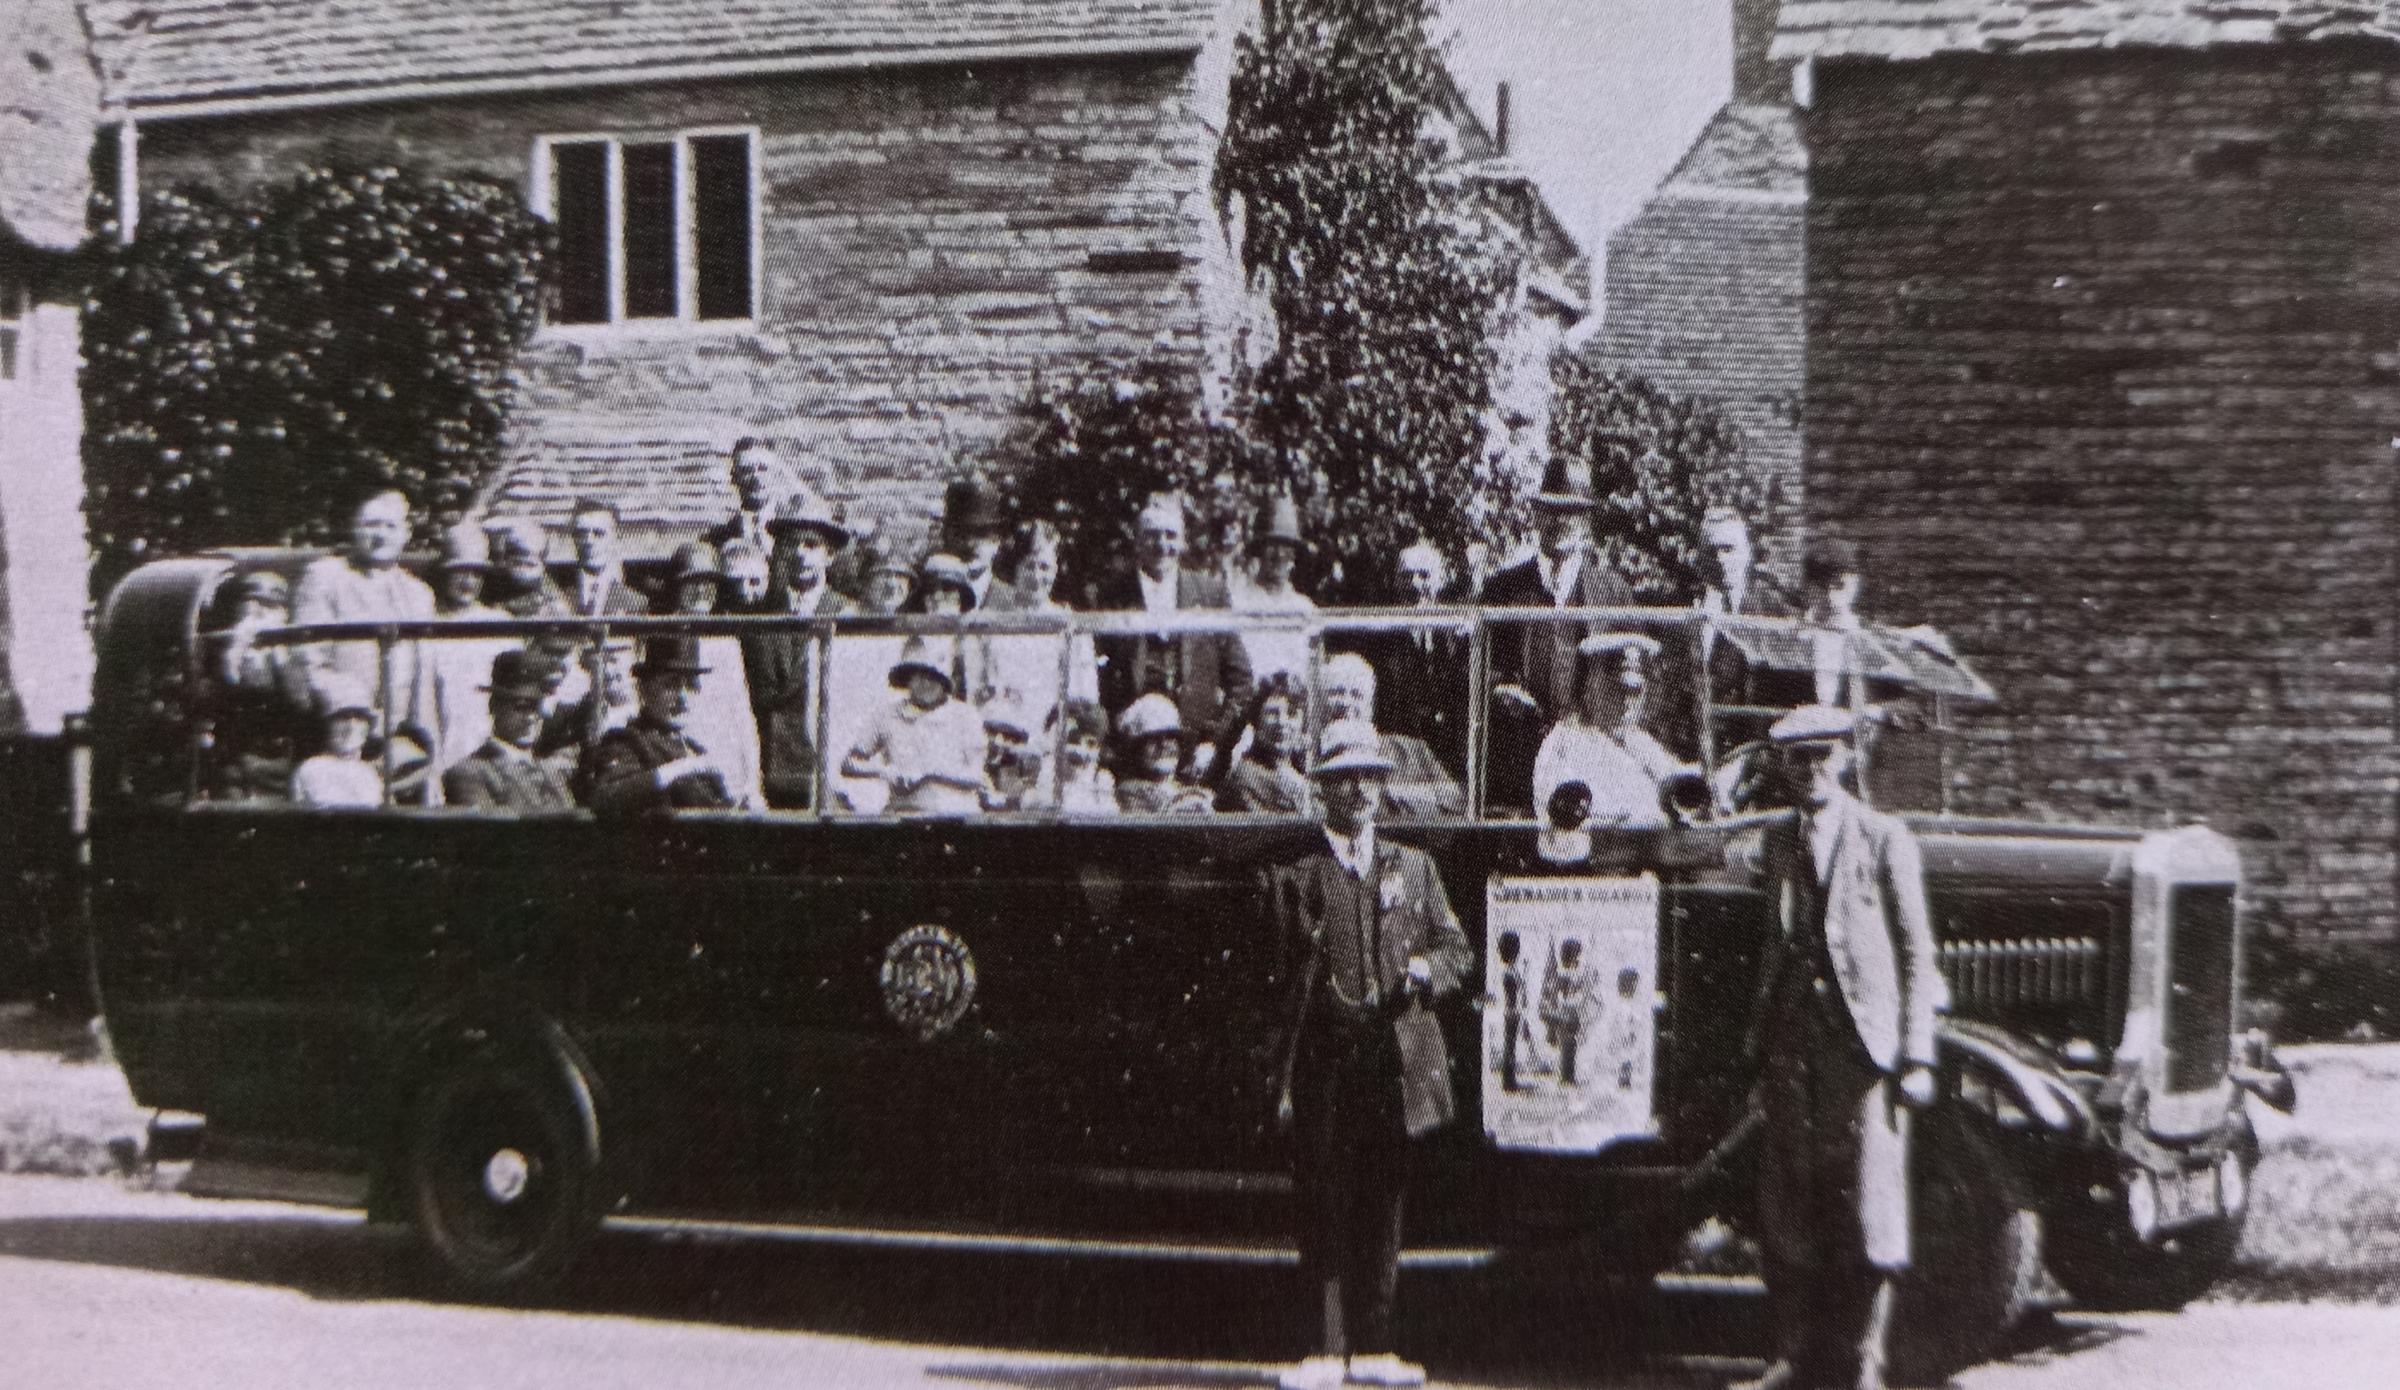 A charabanc outing for the Worcester branch of the Grenadier Guards Association in the 1920s